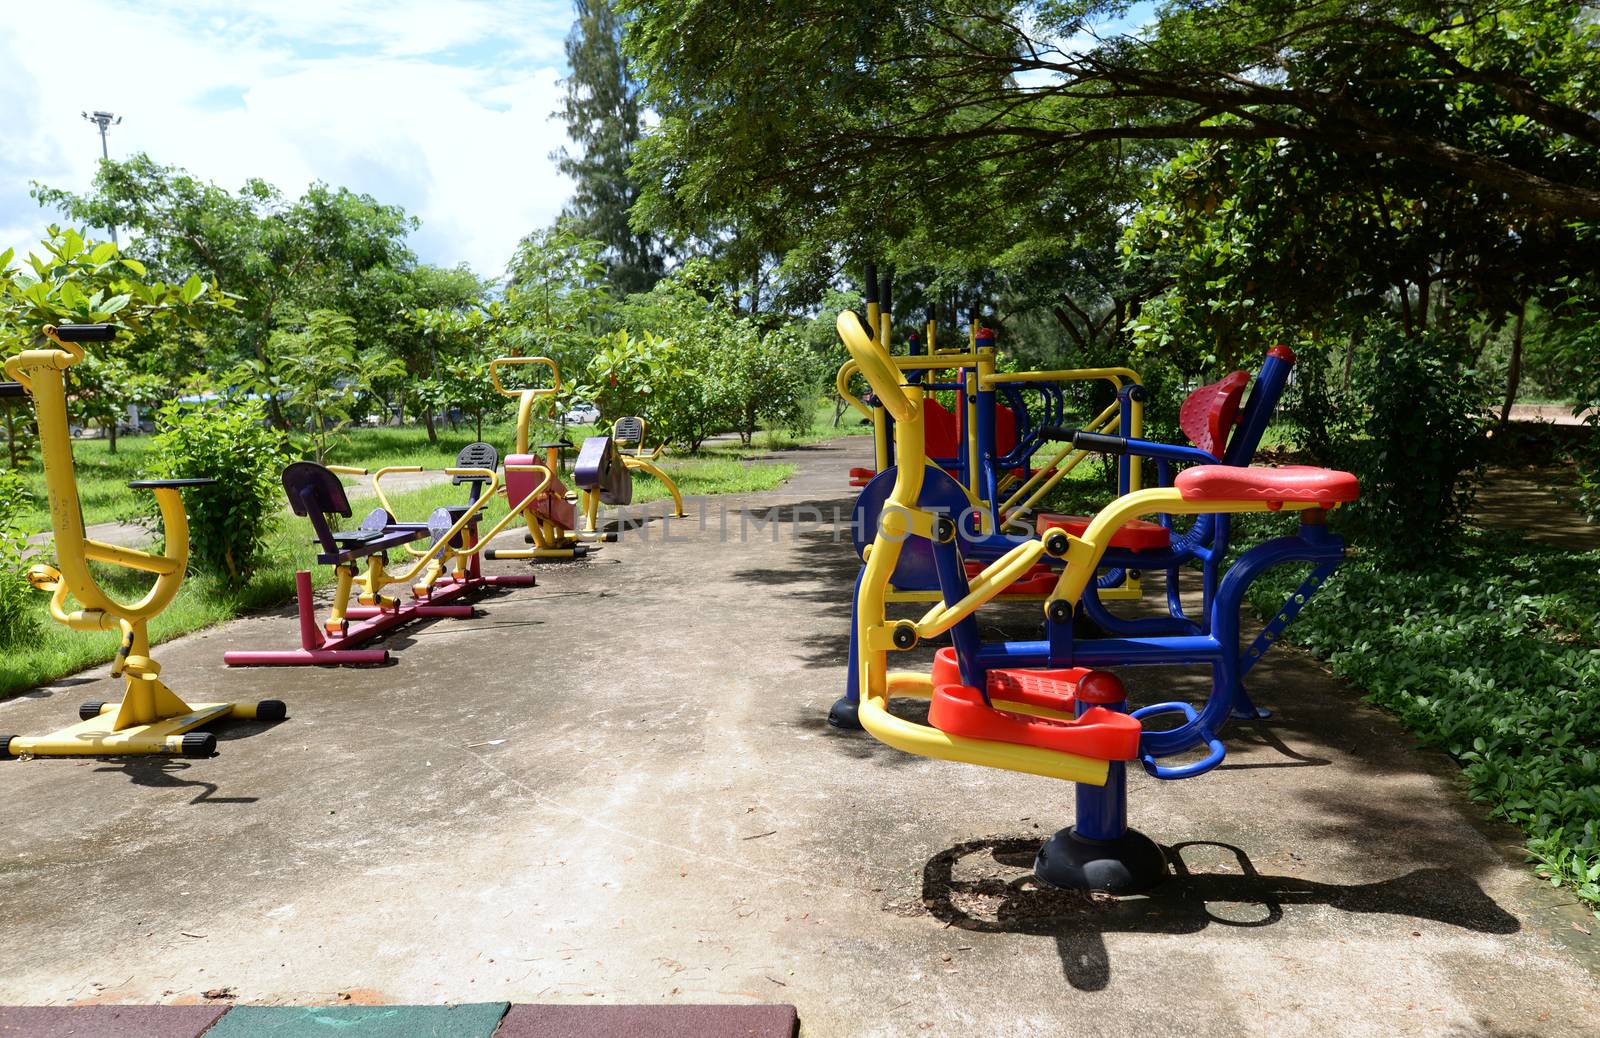 The colorful outdoor exercise machines in the park are lush many green trees.